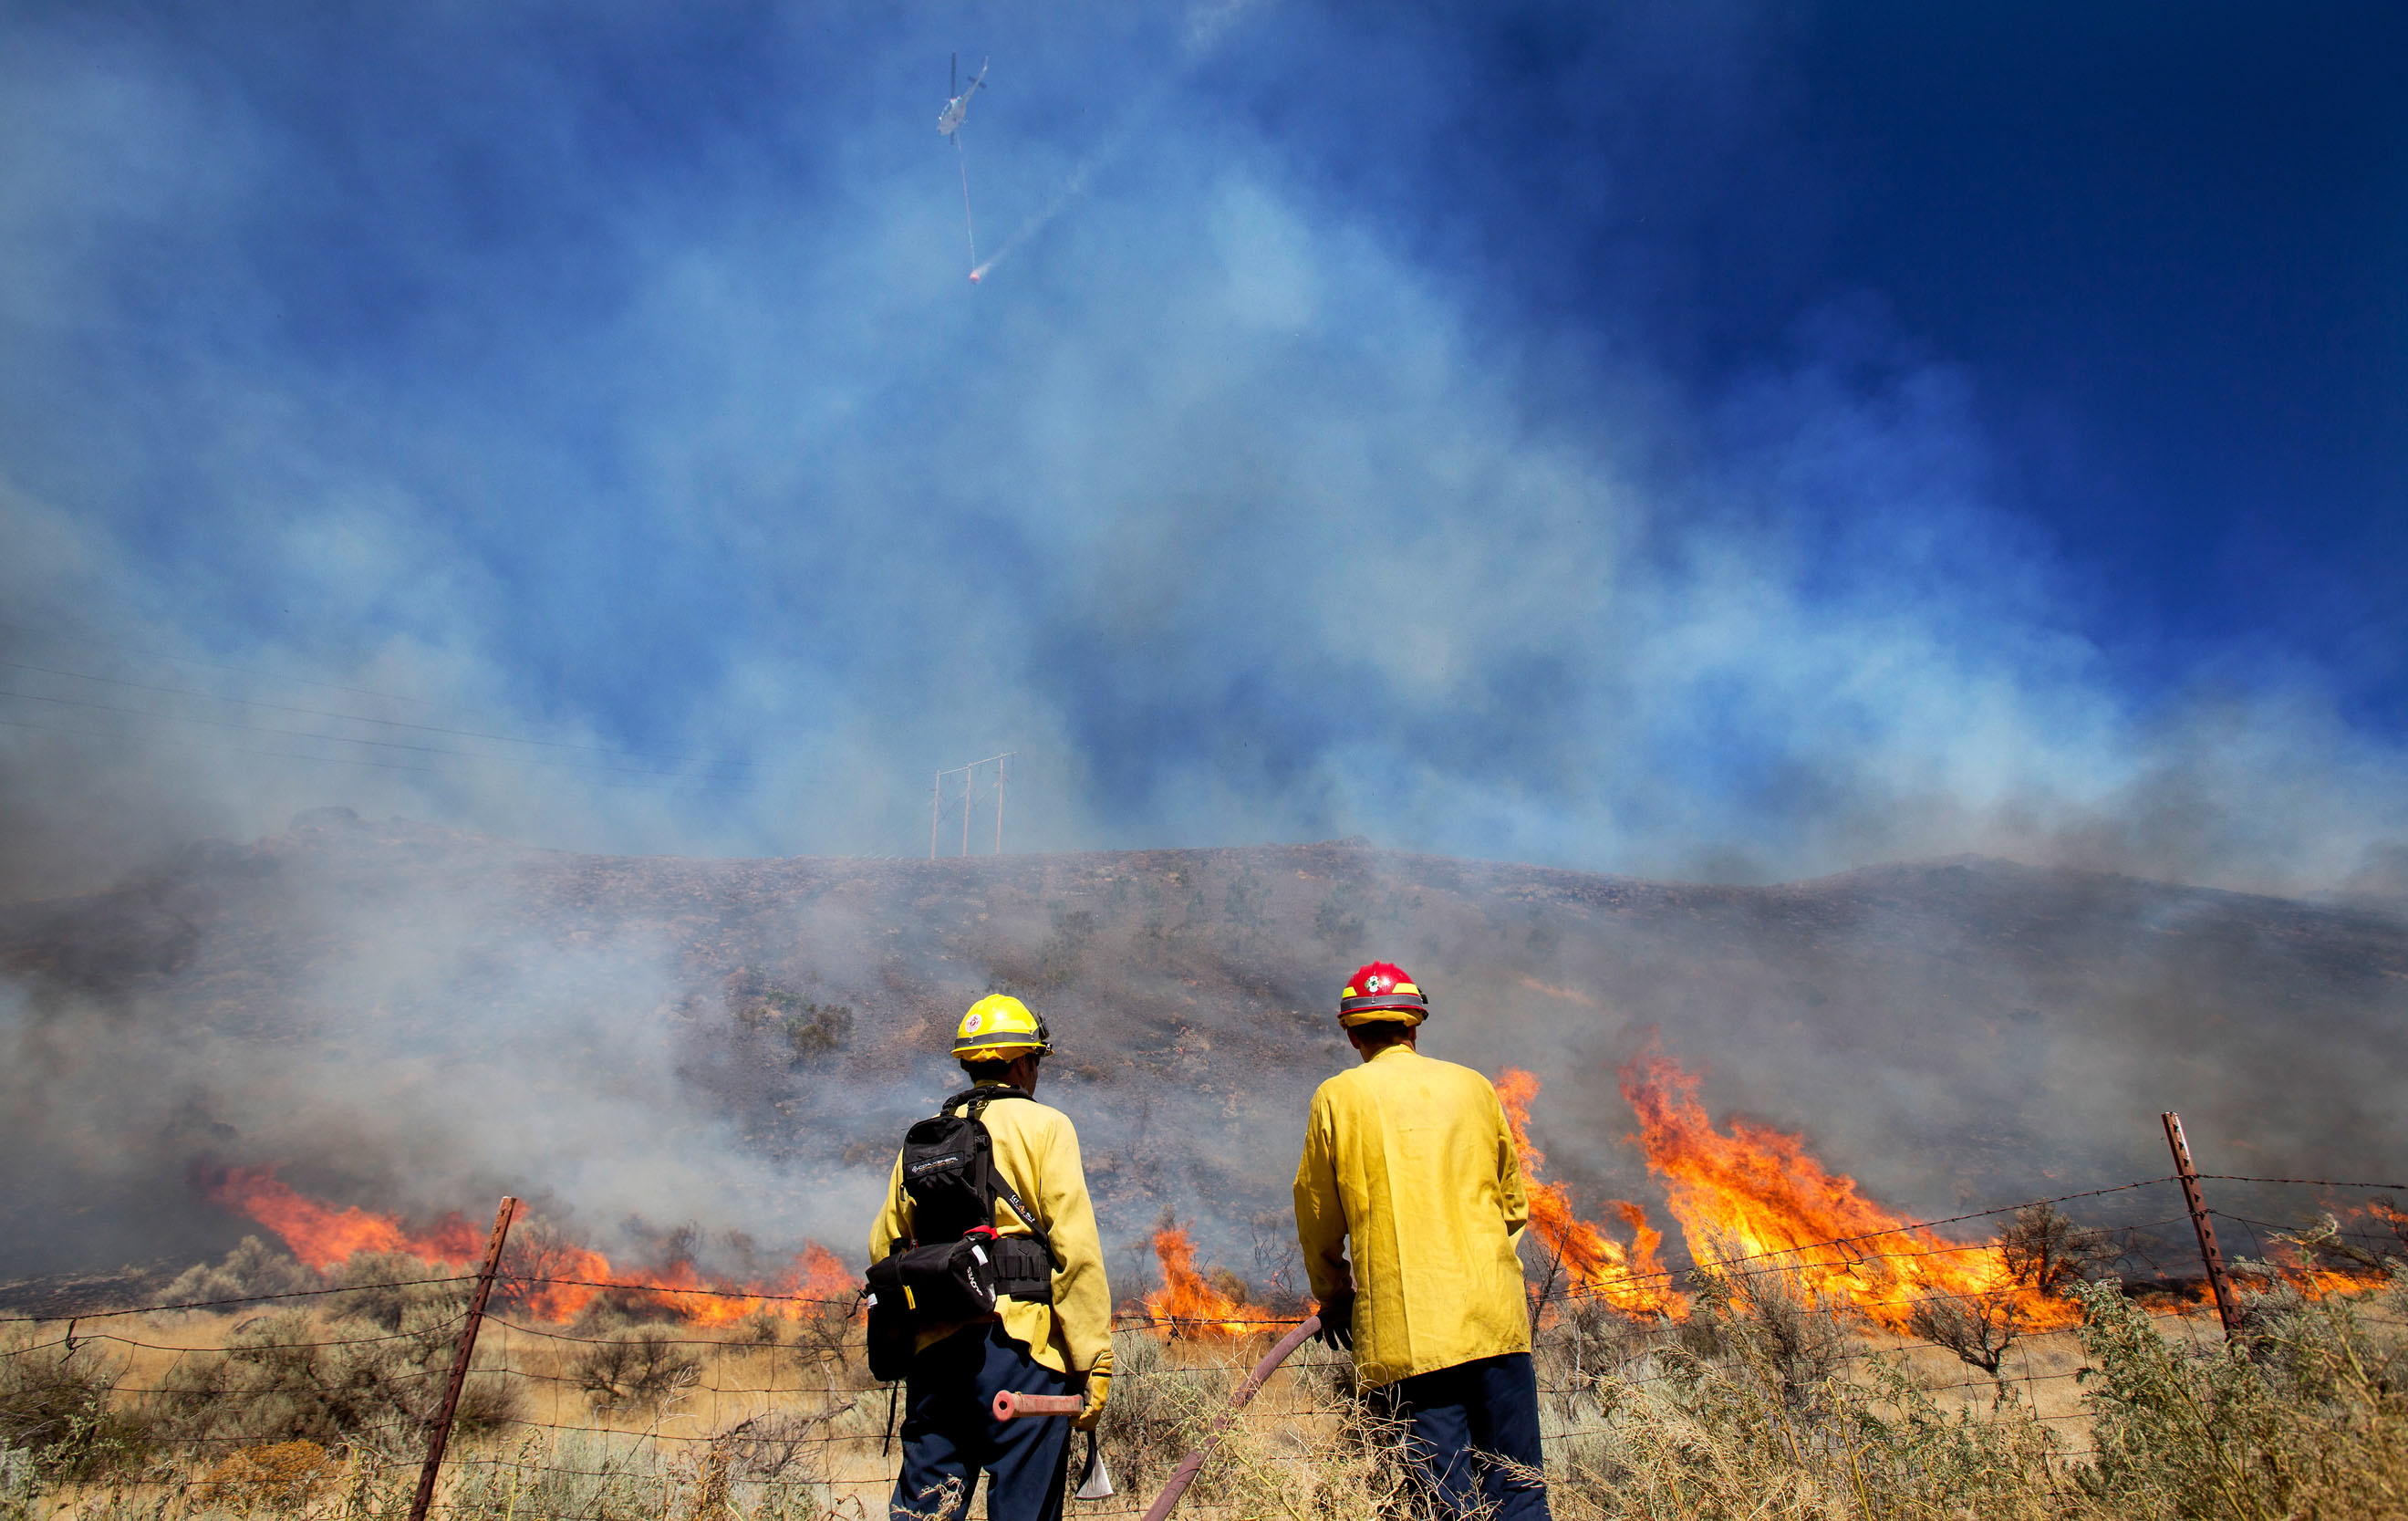 With a helicopter and water bucket flying overhead, firefighters wait for flames to reach them before spraying them down near the intersection of Clockum Pass Road and Tarpiscan Road Saturday near Malaga. Nearly 1,200 fighters are battling a wildfire that has grown to about 14 square miles near Goldendale.